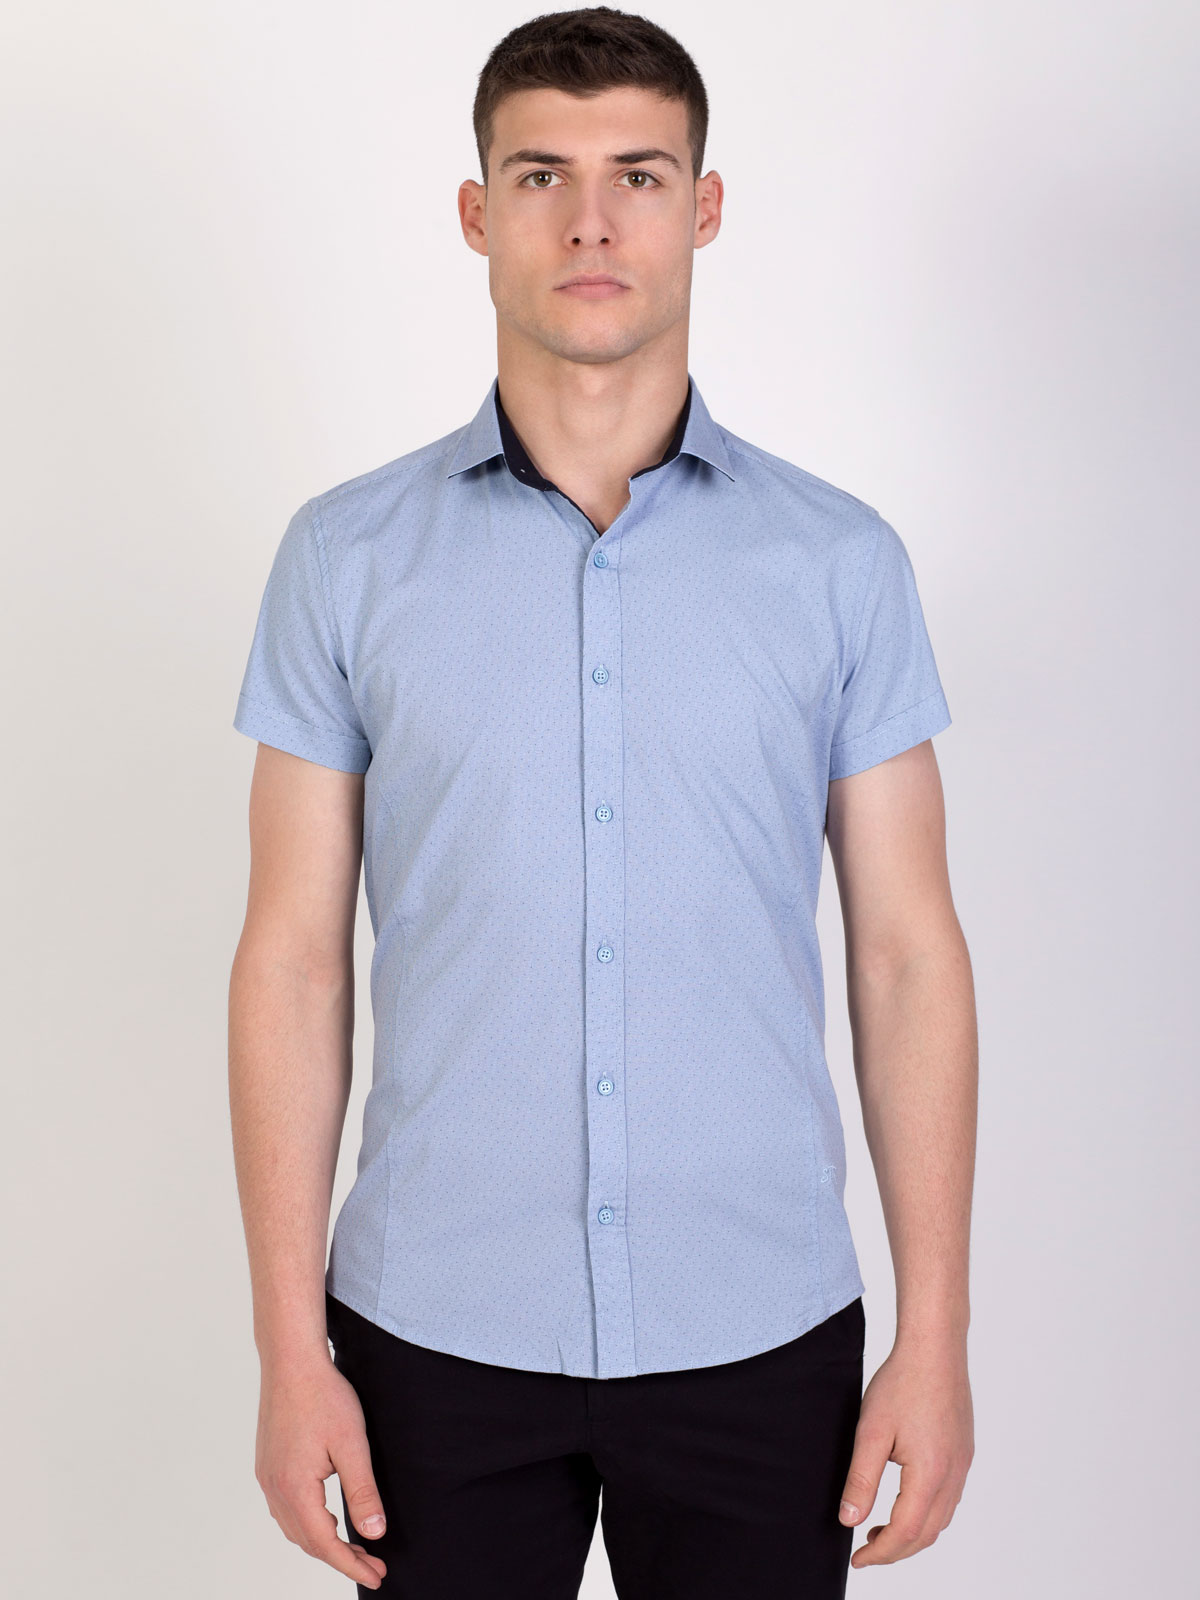 Dotted shirt in light blue - 80205 € 11.25 img4